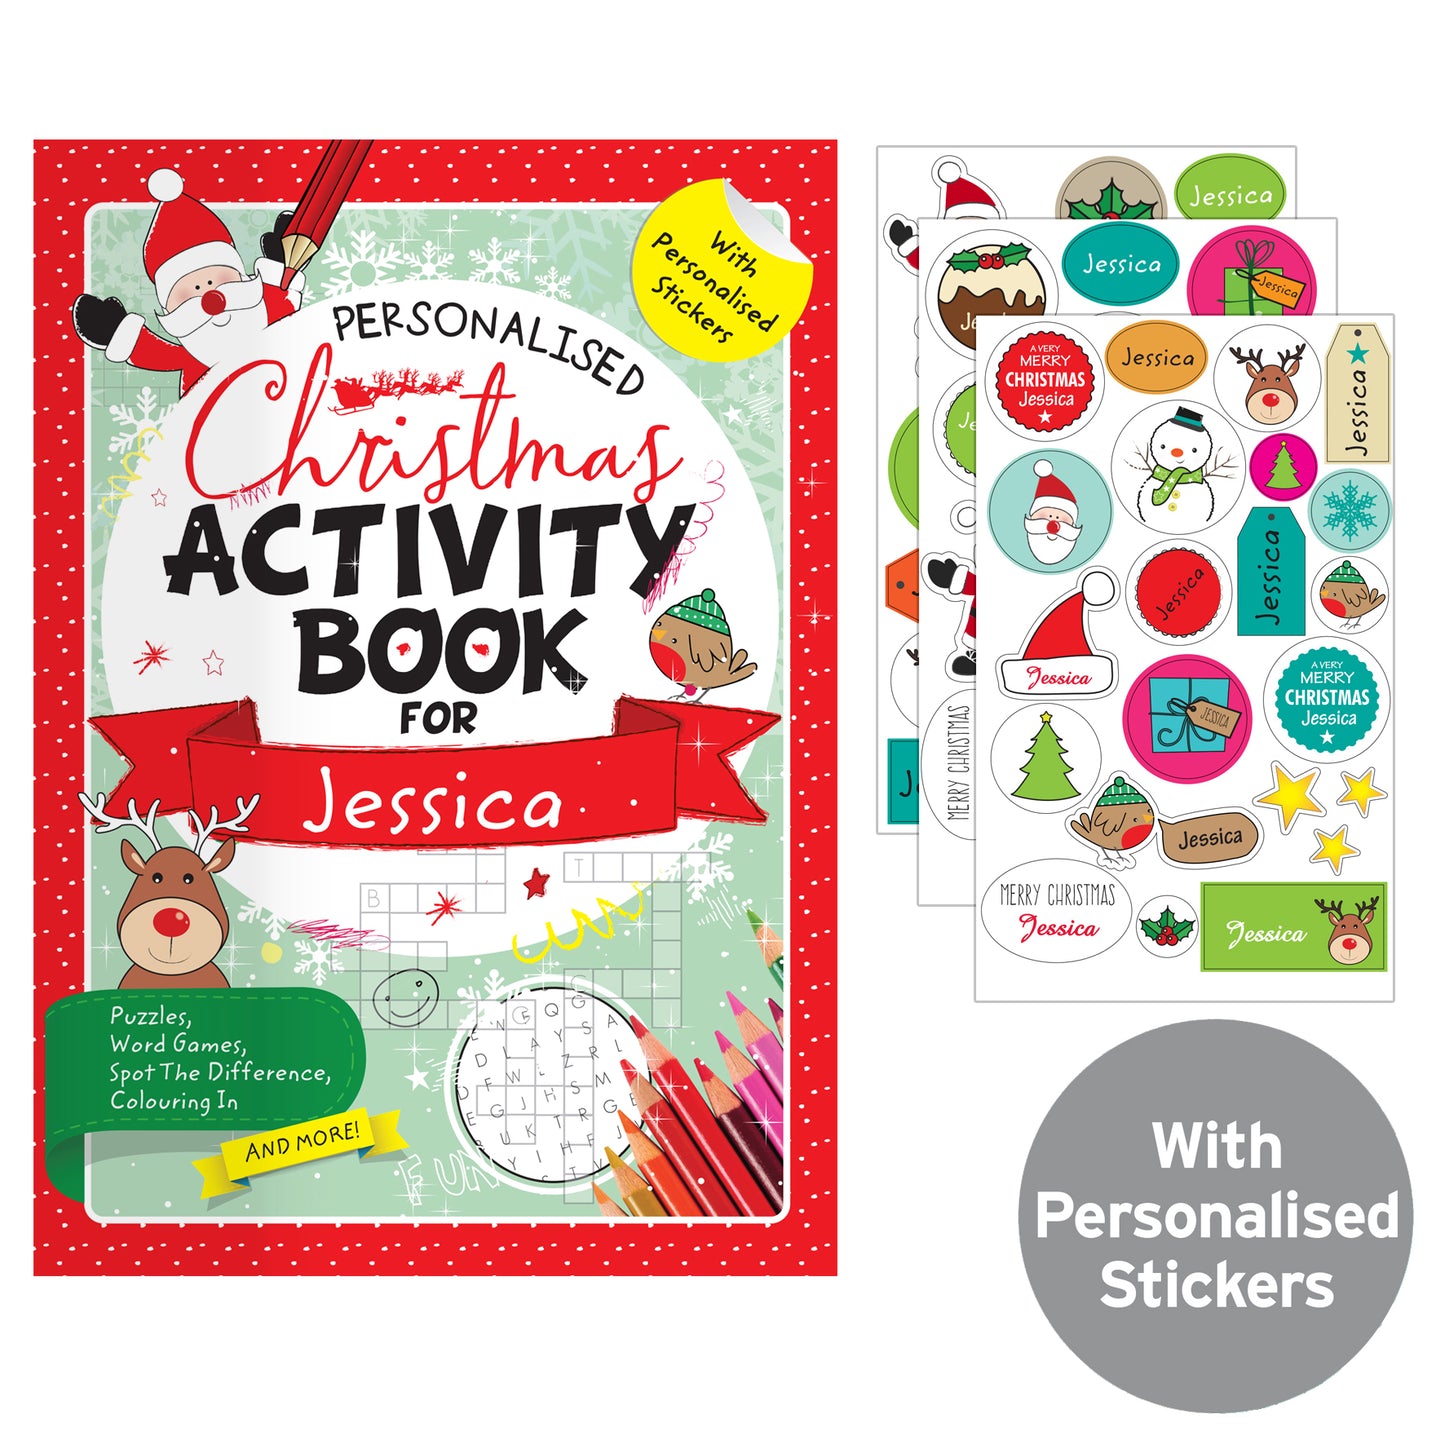 Personalised Christmas Activity Book with Stickers - Personalise It!